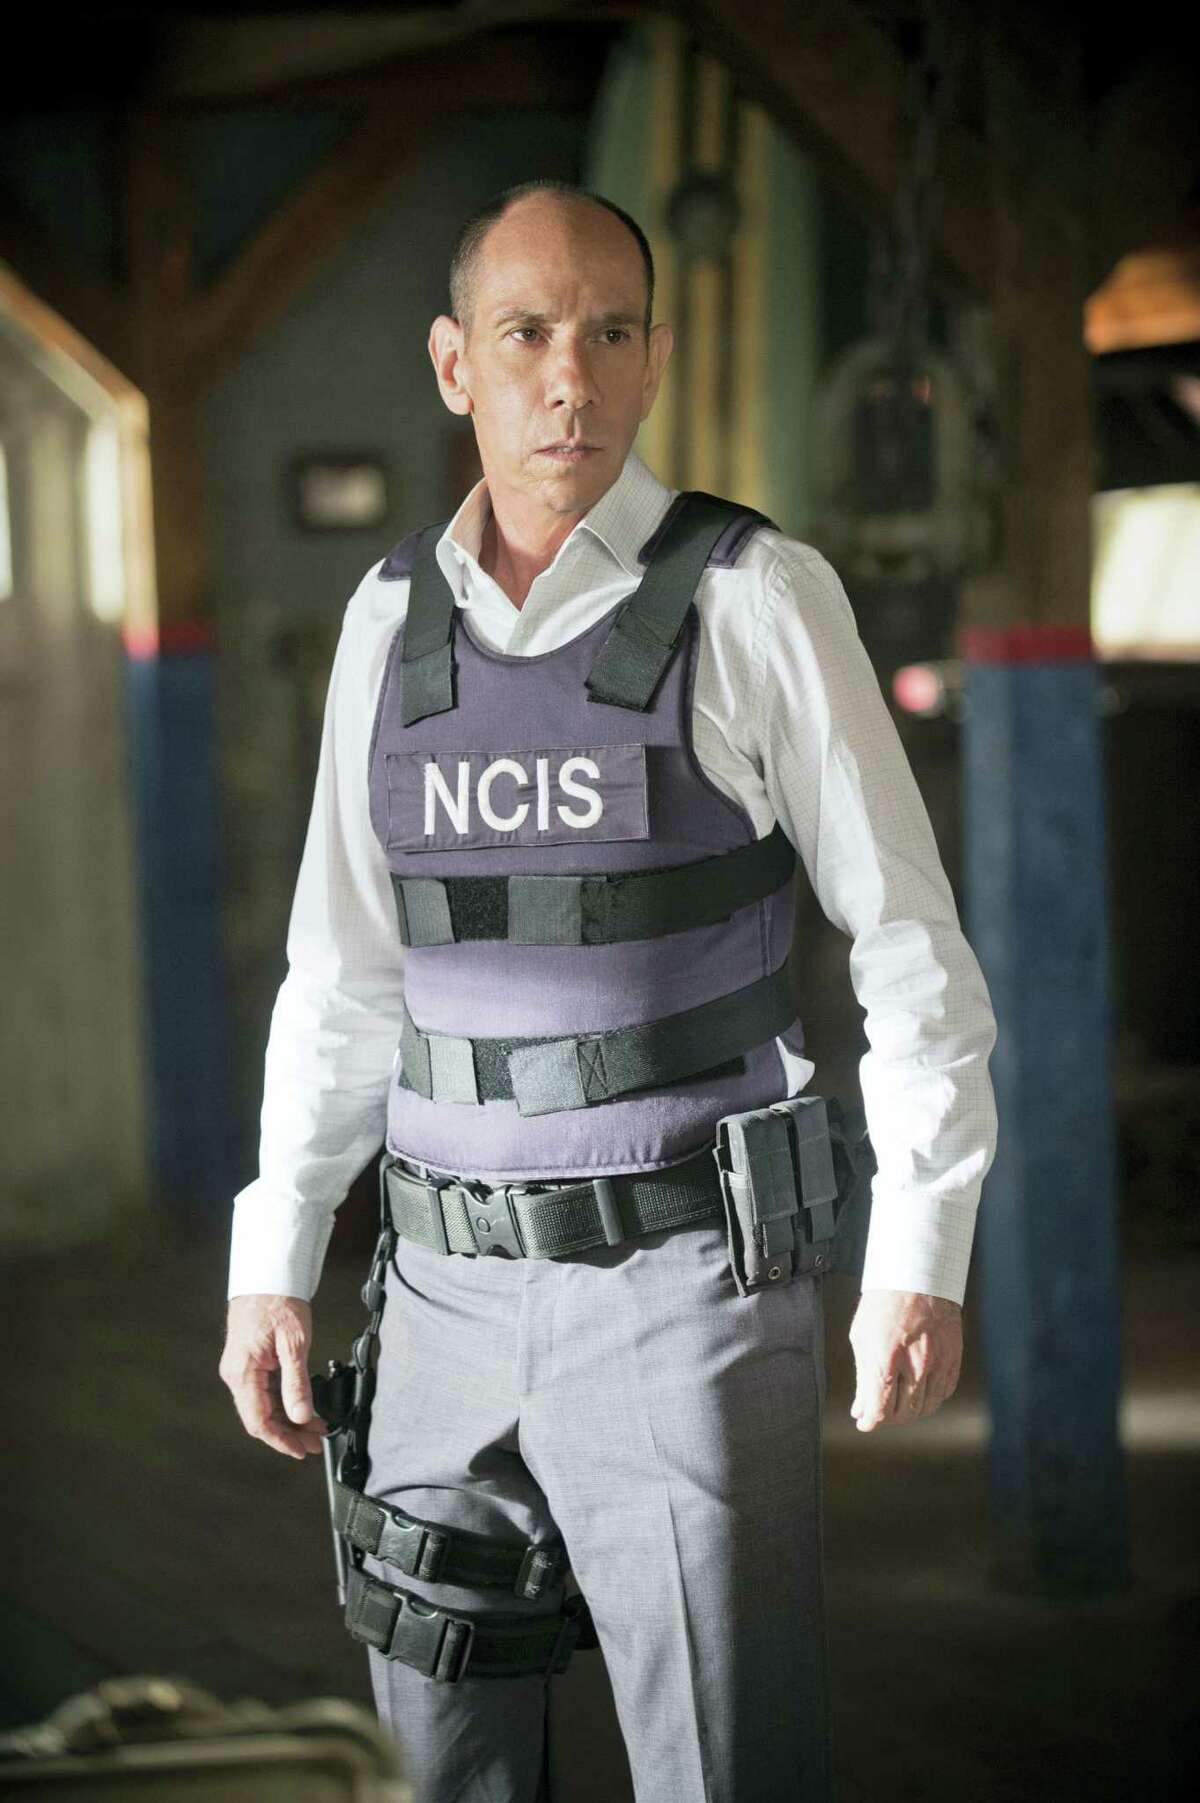 This image released by CBS shows Miguel Ferrer in character as NCIS Assistant Director Owen Granger in NCIS: Los Angeles. Ferrer, who brought stern authority to his featured role on CBS’ hit drama “NCIS: Los Angeles” and, before that, to “Crossing Jordan,” died Thursday, Jan. 19, 2017, of cancer at his Los Angeles home. He was 61.